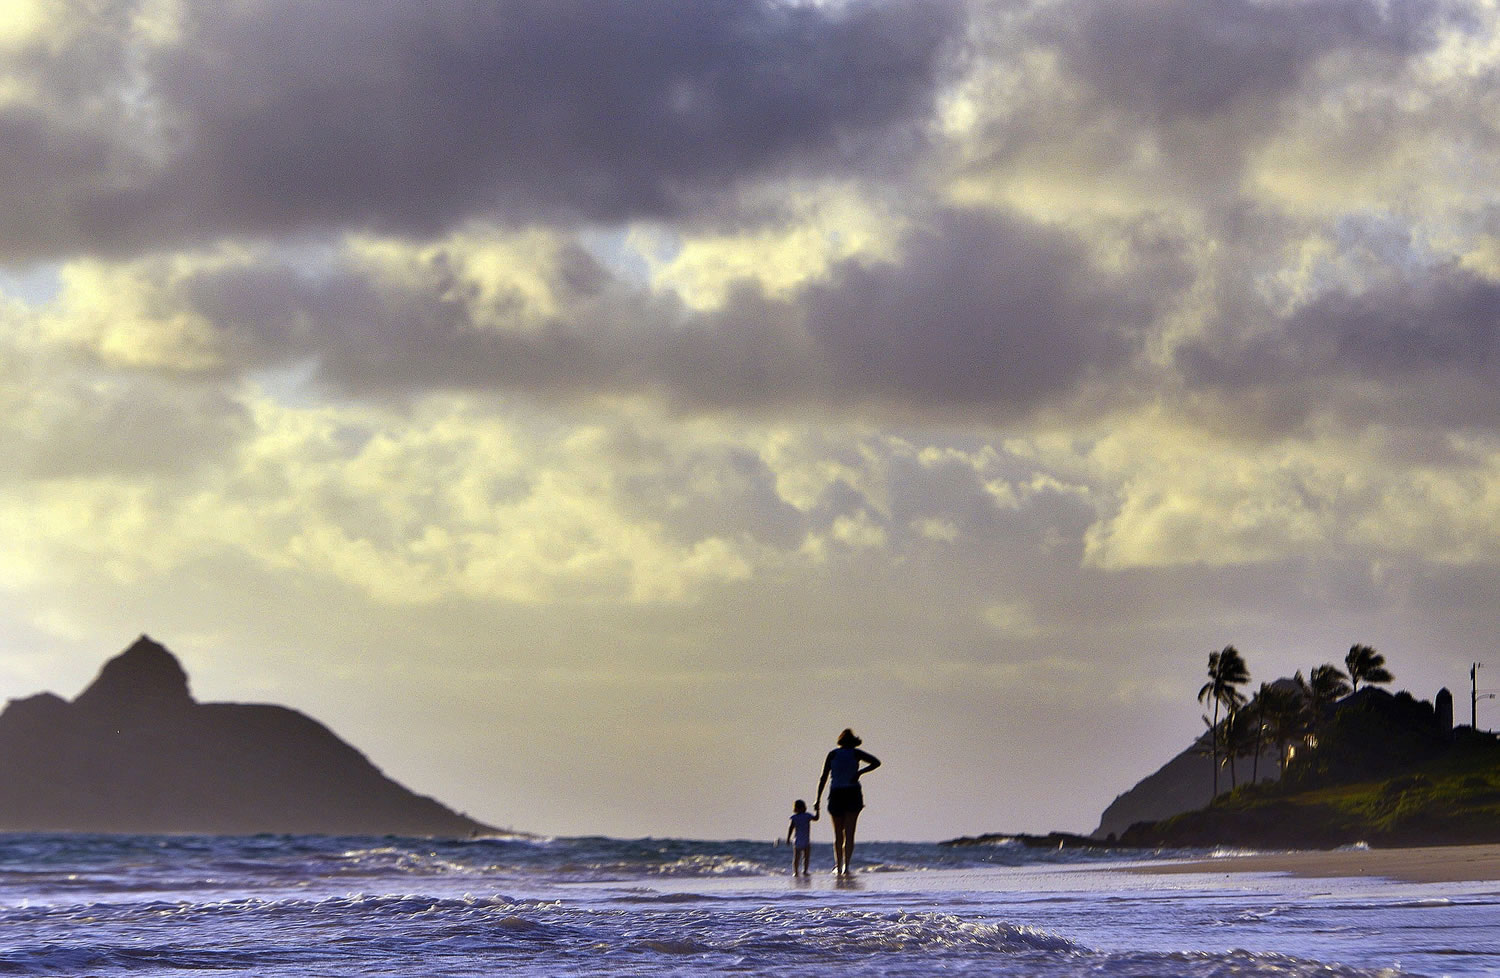 Anne Kllingshirn, of Kailua, Hawaii walks with her daughter Emma, 1, as storm clouds float overhead during the sunrise hours on Kailua Beach, in Kailua, Hawaii, on Thursday morning.